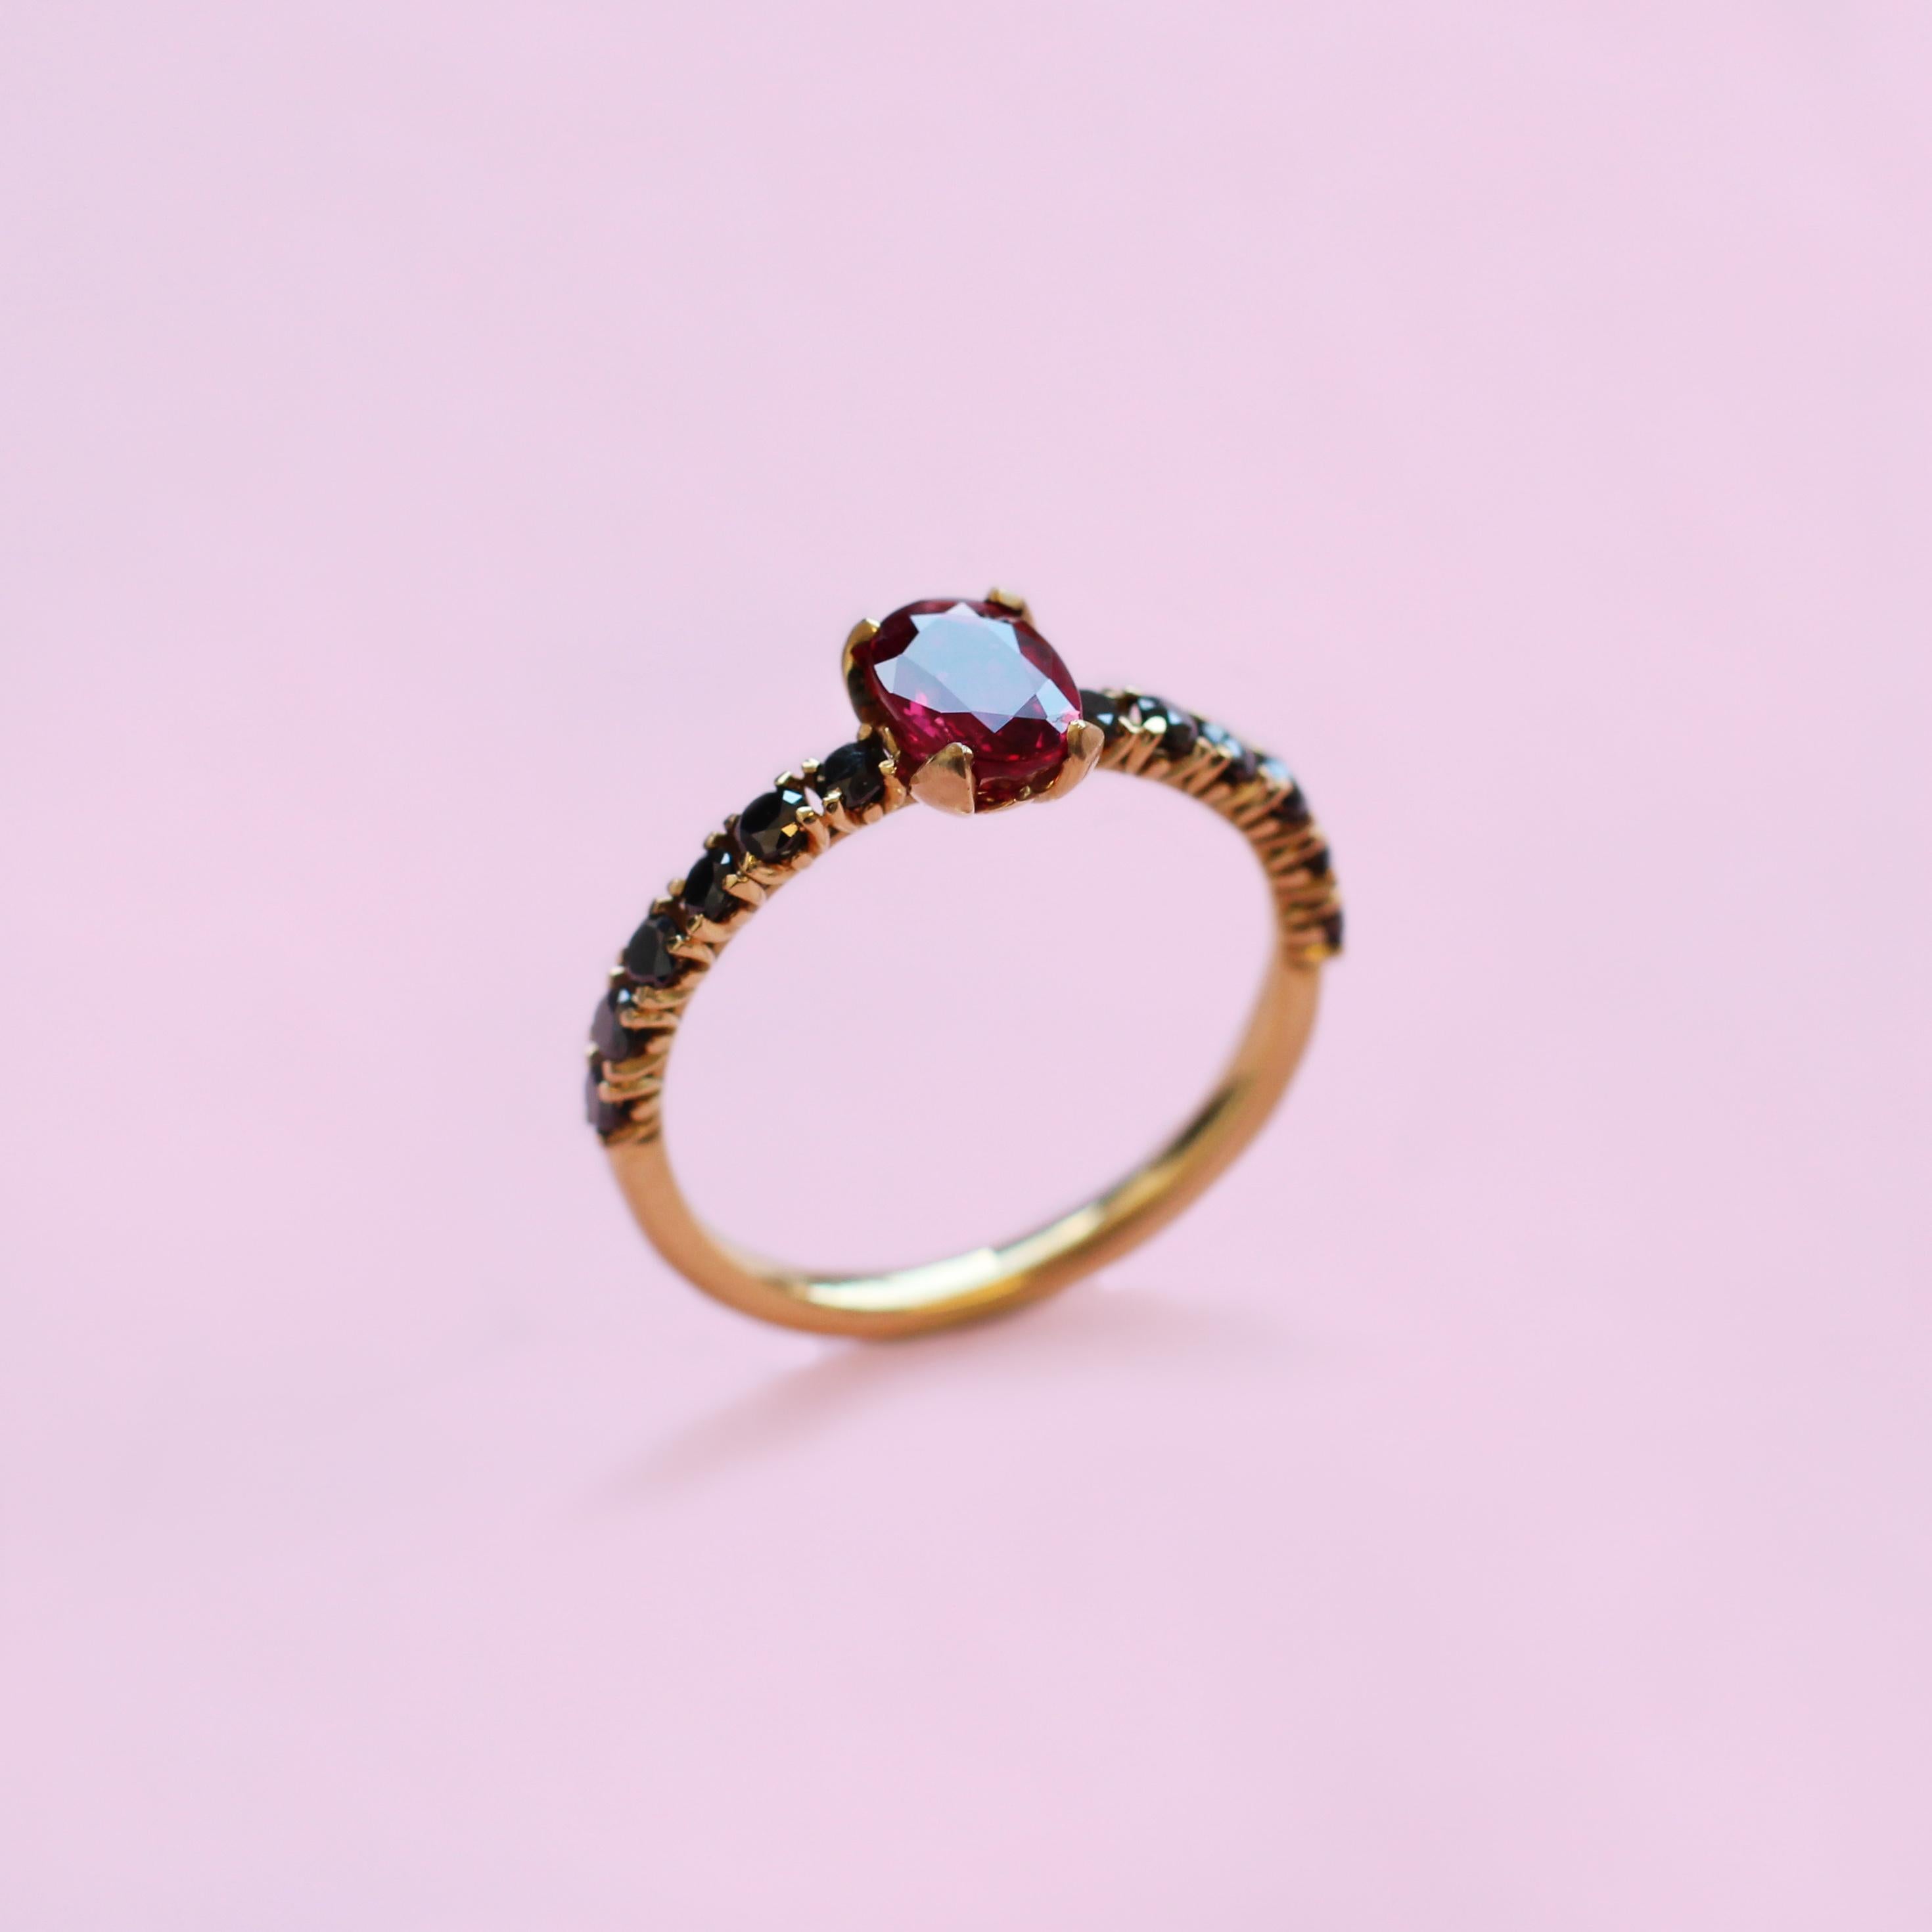 For Sale:  1 Carat Ruby and Black Diamond Solitaire Ring Set in 18 Karat Yellow Gold 3